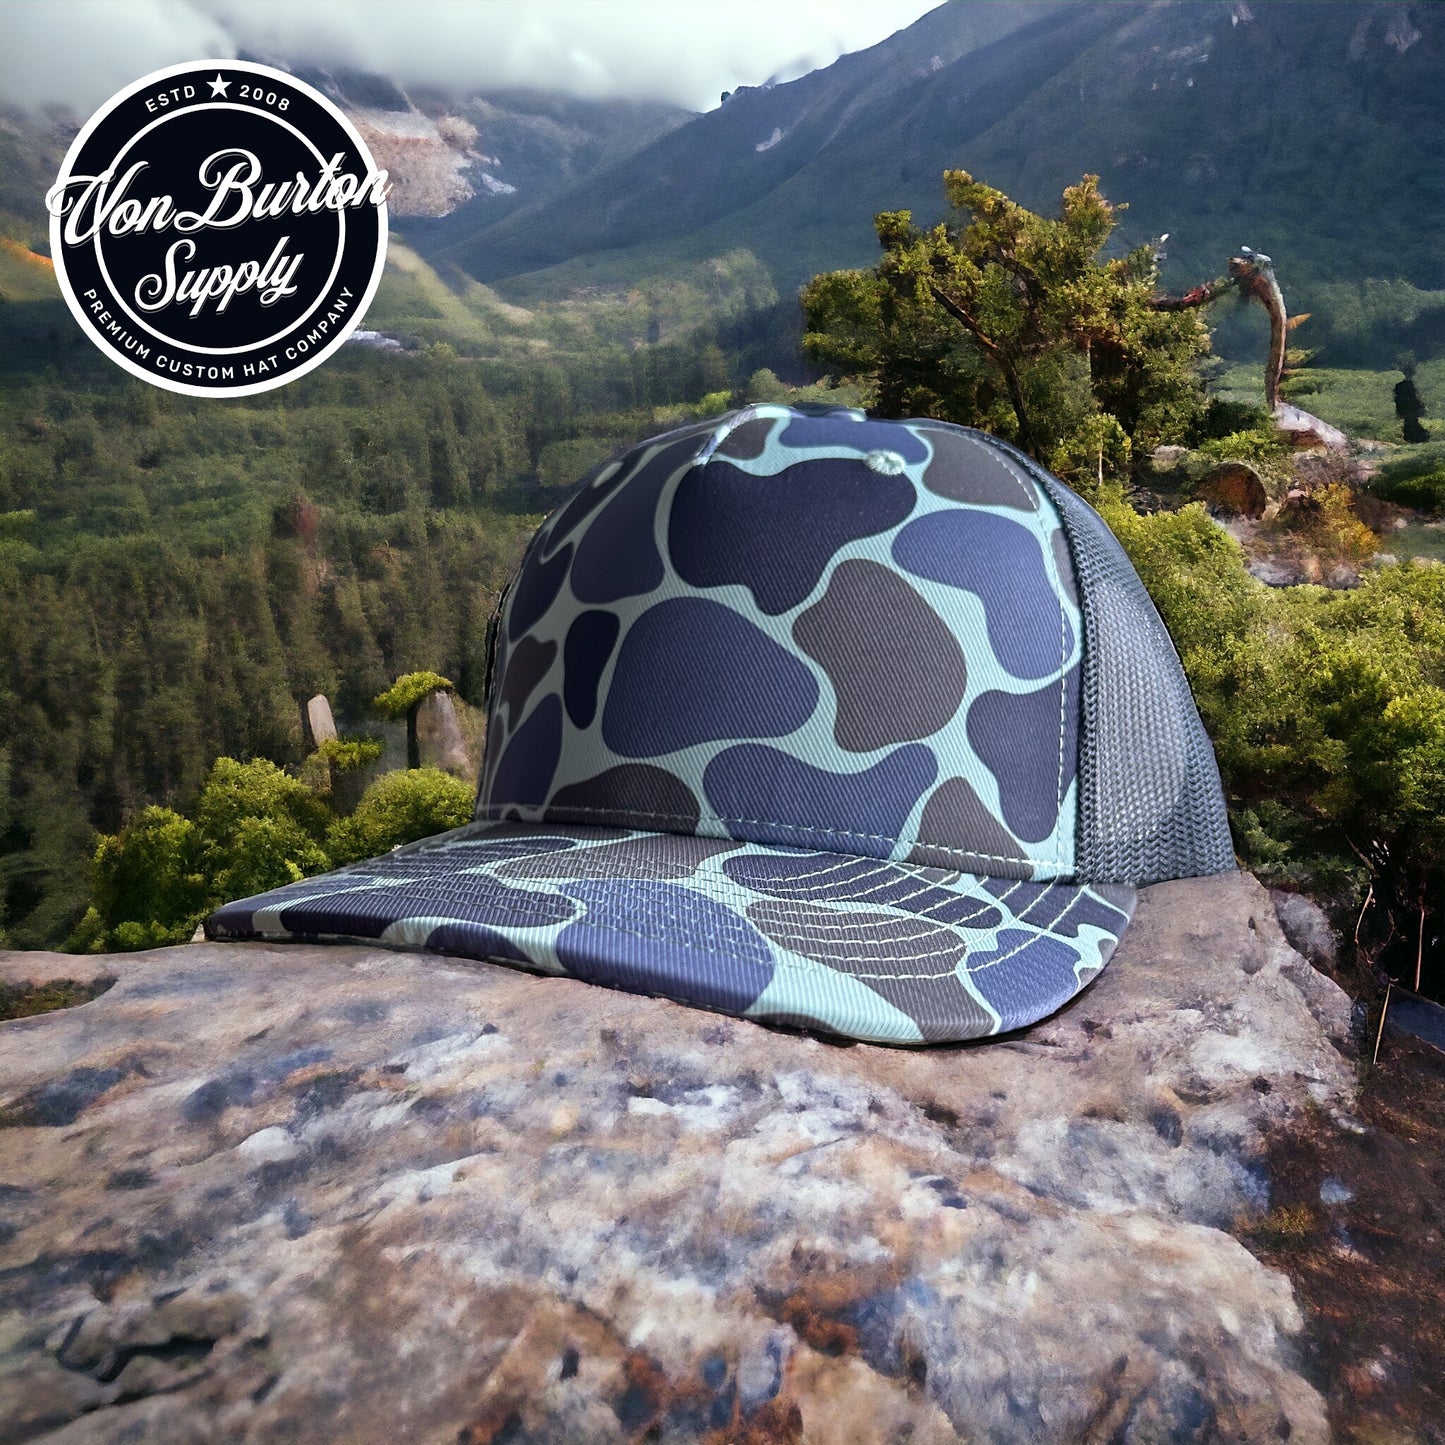 leather patch hats, custom patch hats, custom leather patch hats, vintage blue rock duck camo five panel leather patch trucker hat, duck camo five panel trucker hat, custom camo patch hat, leather patch trucker hat, richardson 112 pfp duck camo patch hat